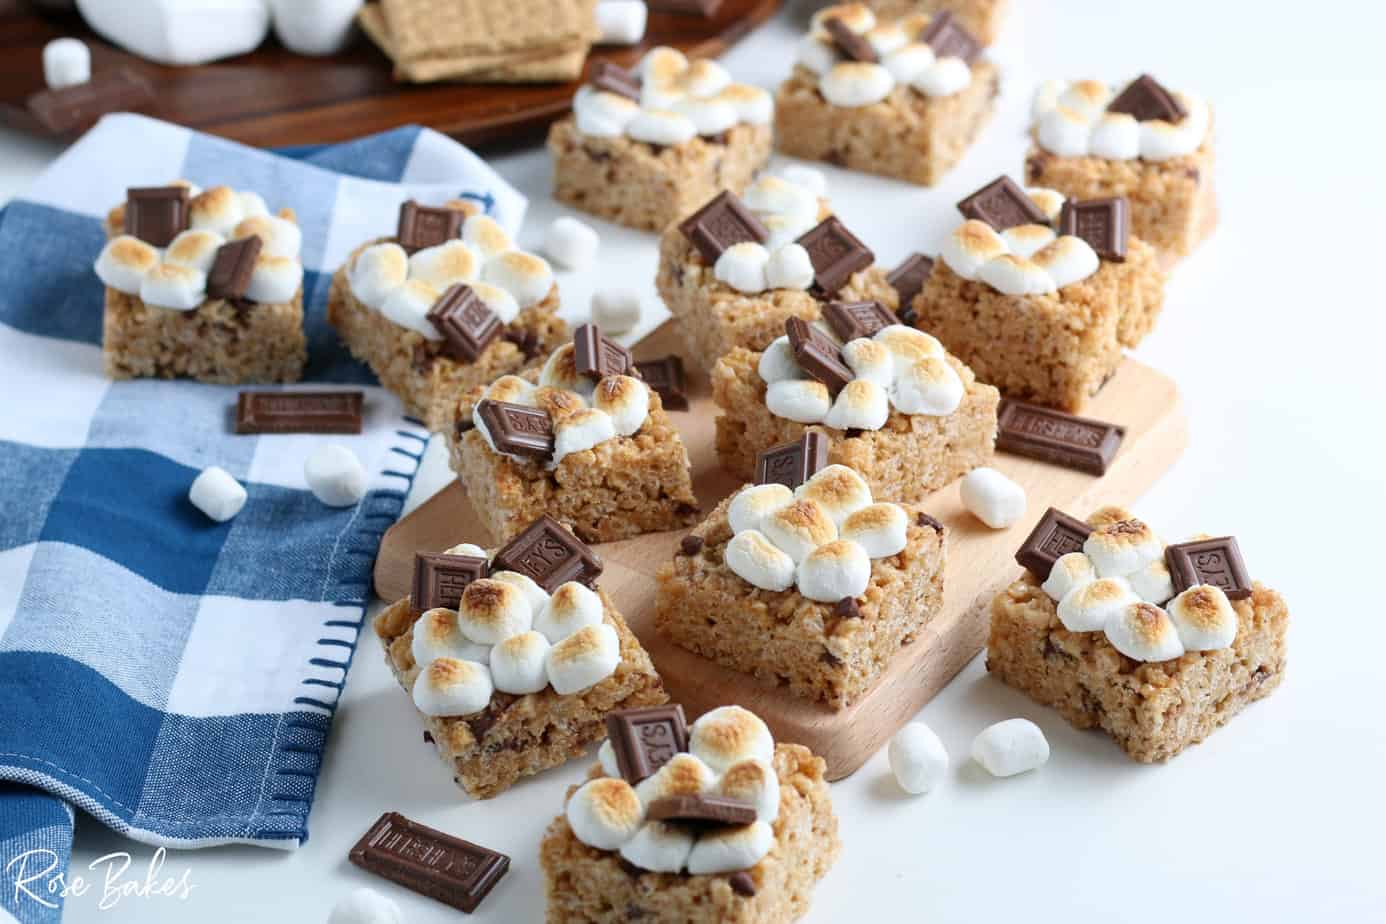 Smores Rice Krispie Treats cut into squares and spread on a cutting board and checkered kitchen towel. They are topped with toasted mini marshmallows and a piece of chocolate.